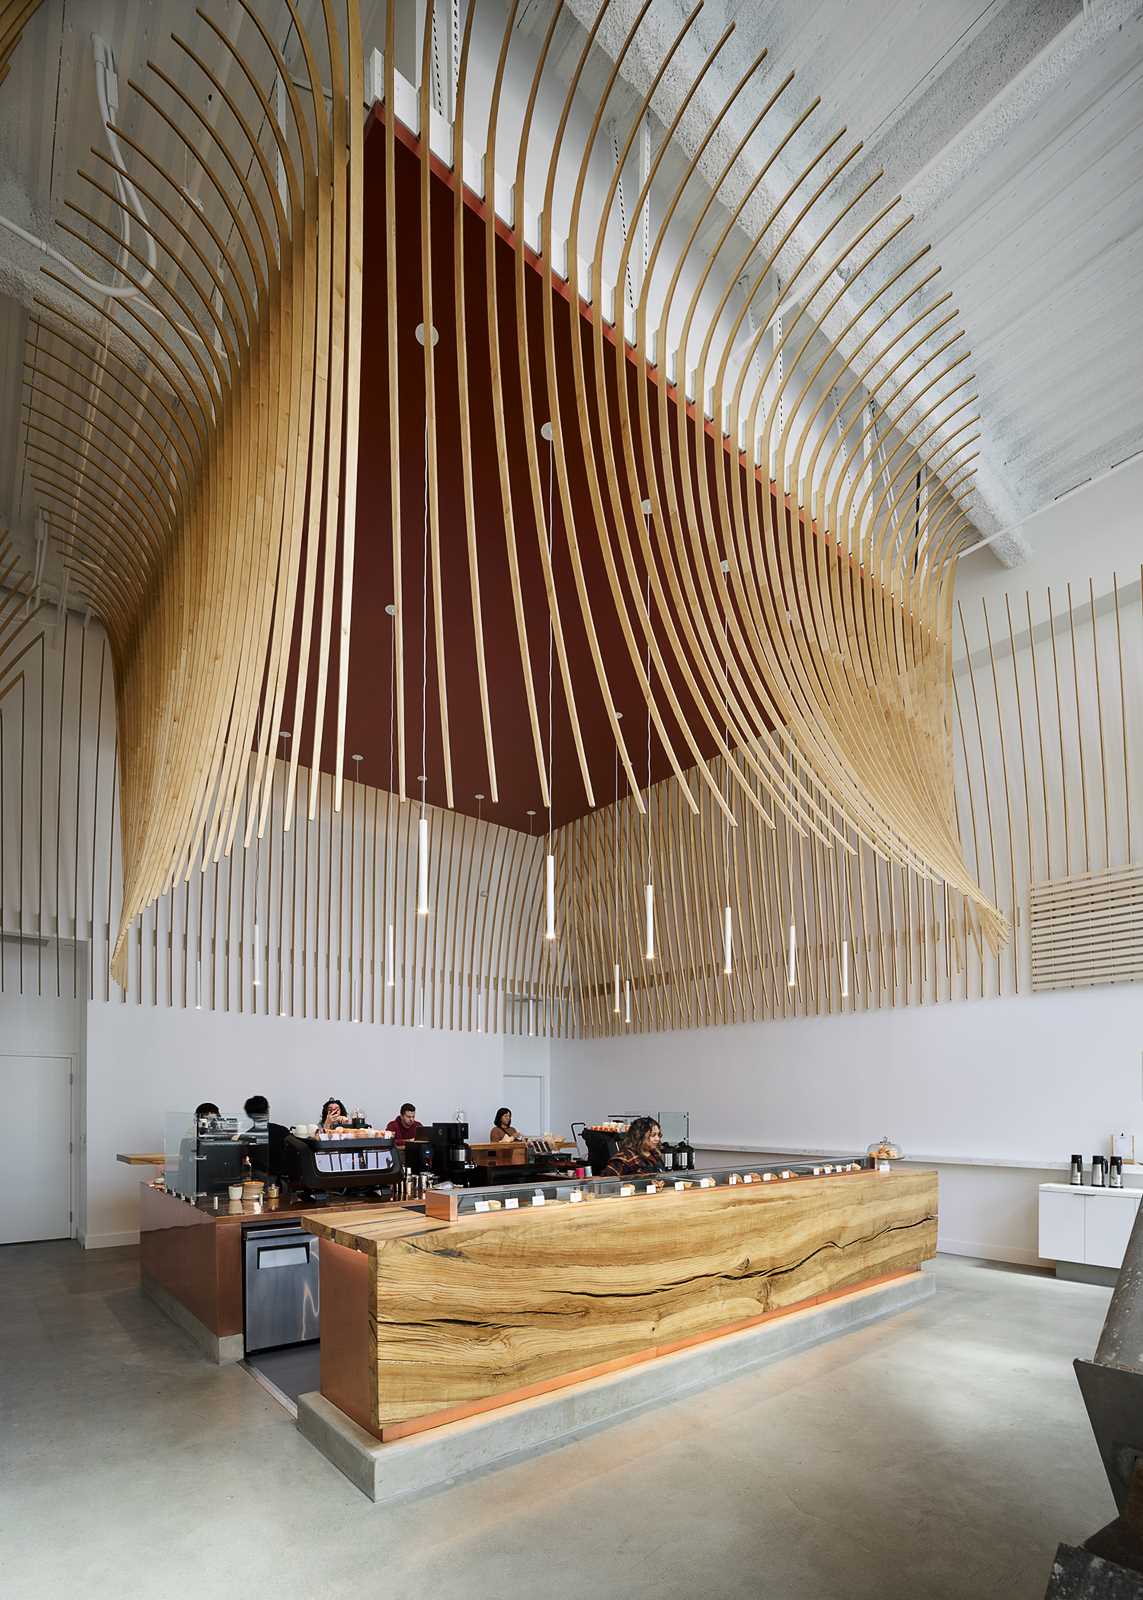 A modern coffee bar with a large wood bar and a sculptural element made from 272 wood slats.